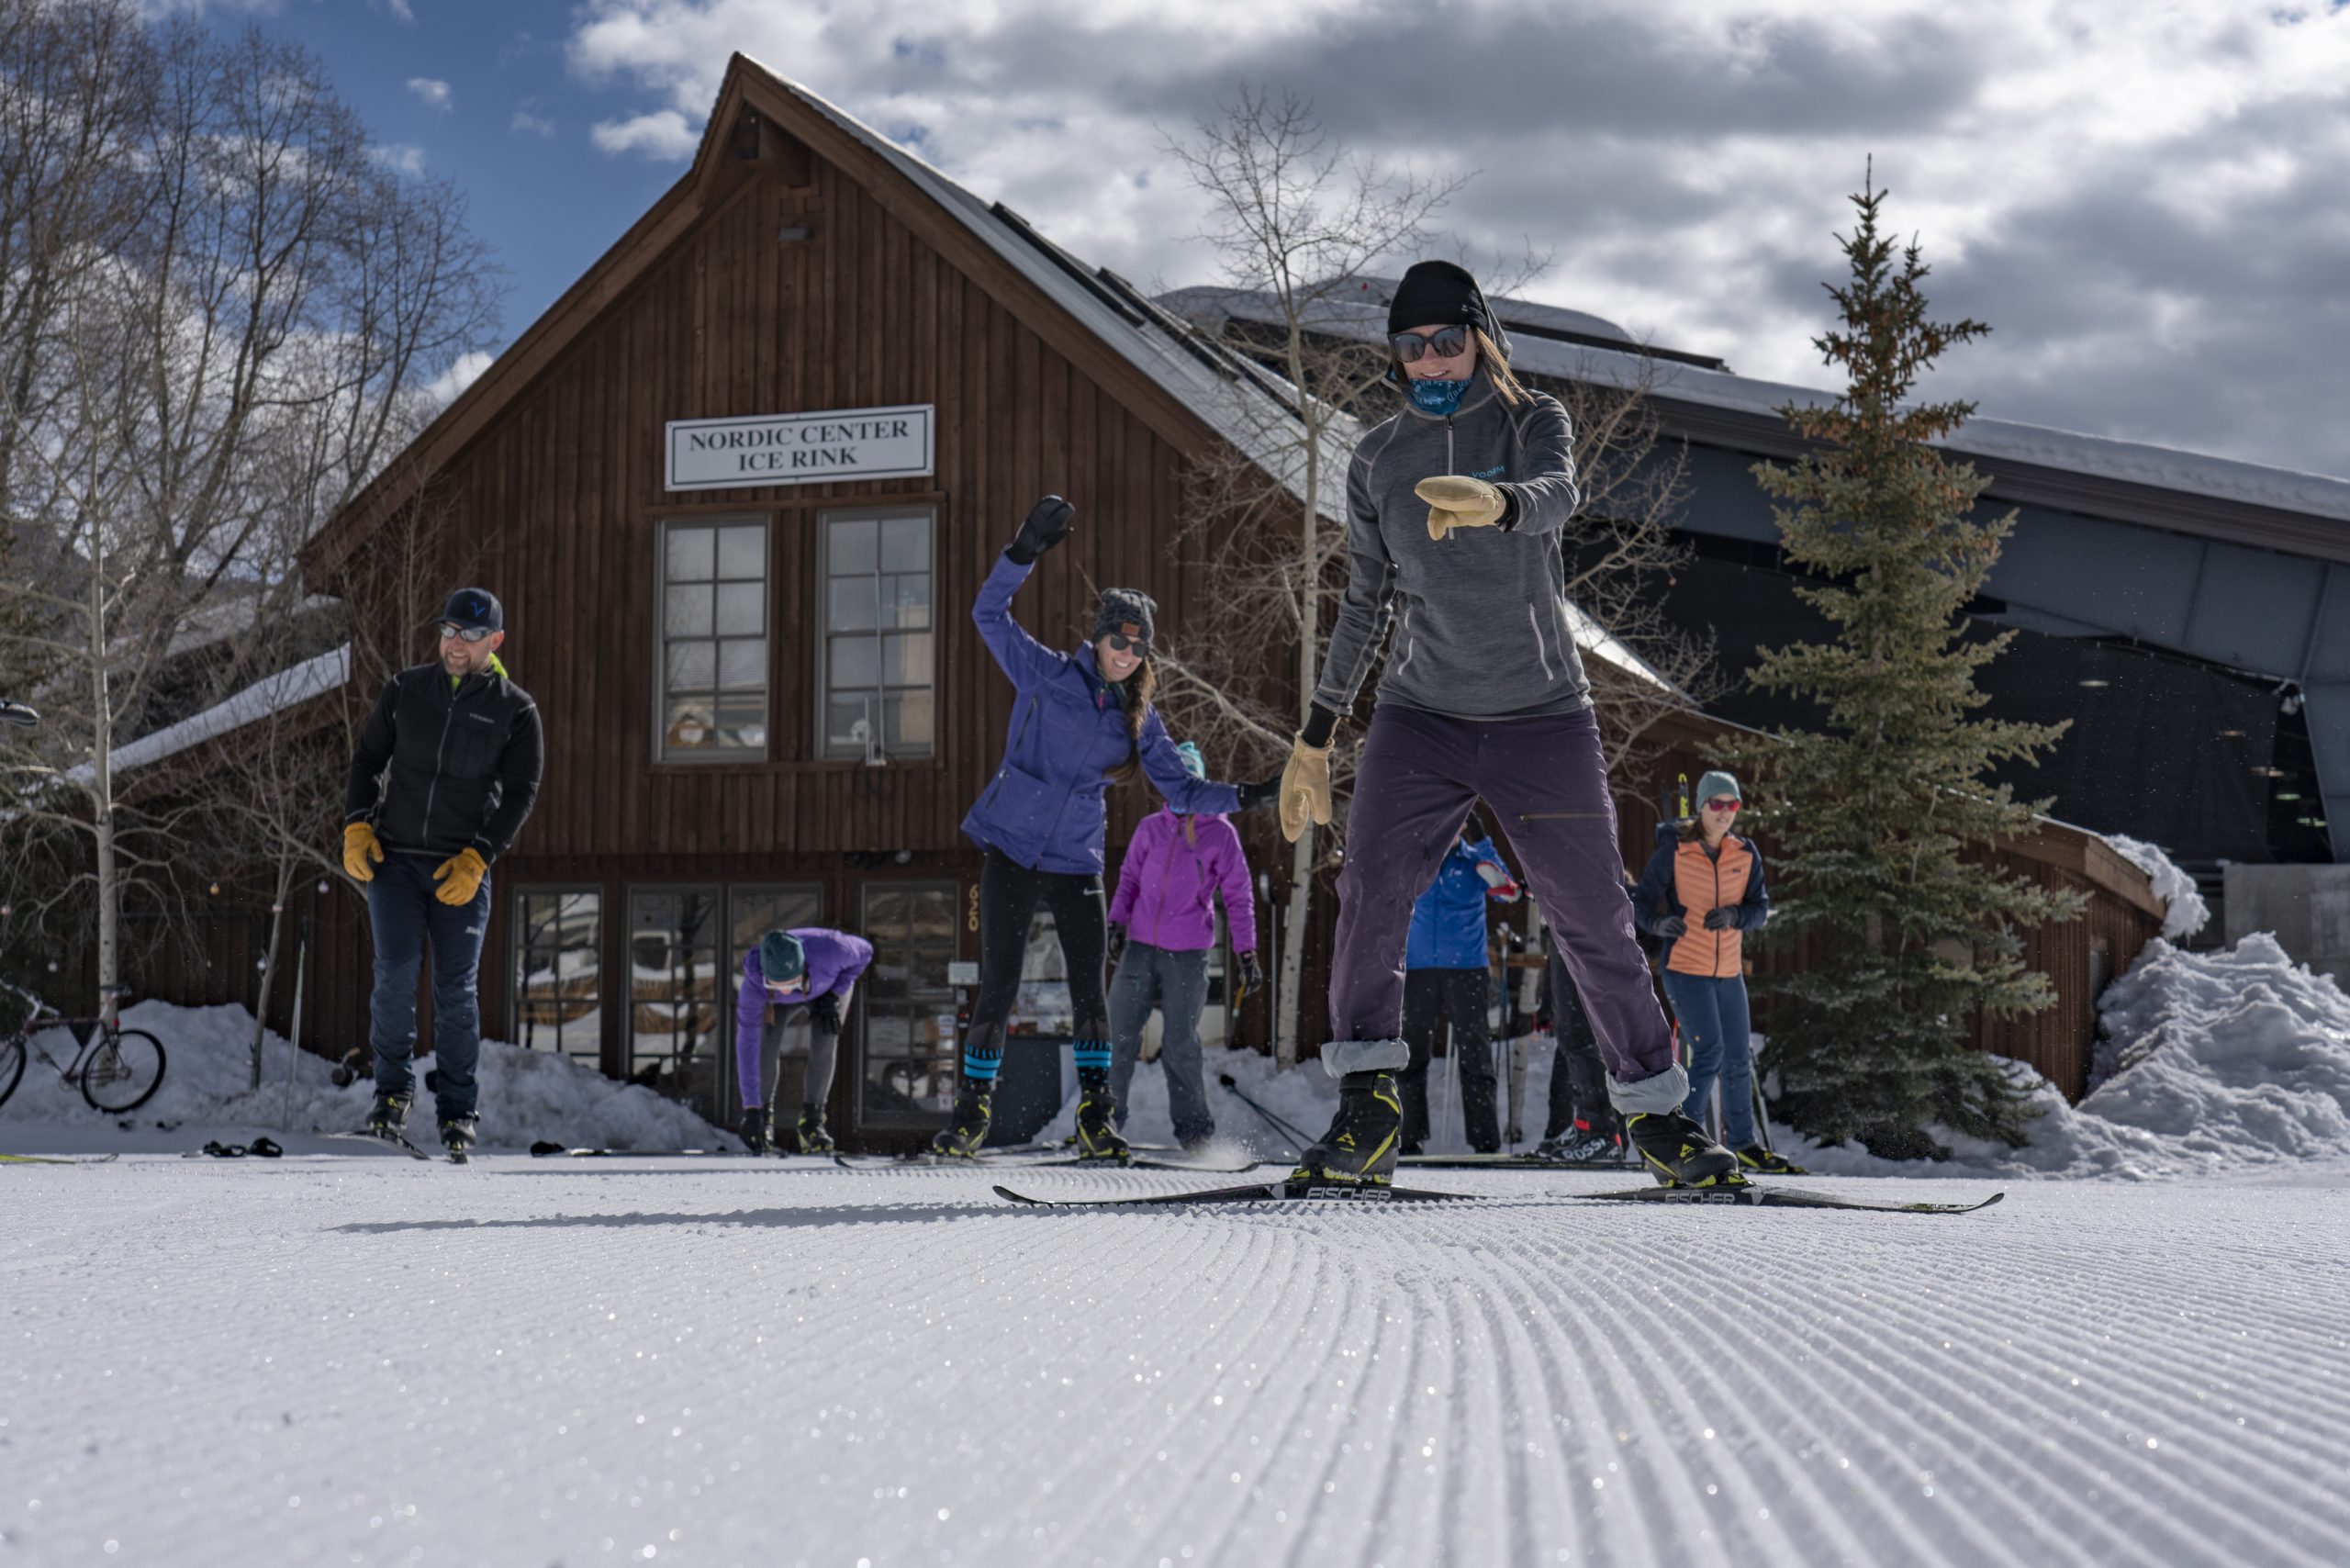 A group of people taking lessons at the Crested Butte Nordic Center. Crested Butte is the "Nordic Ski Capital of Colorado"